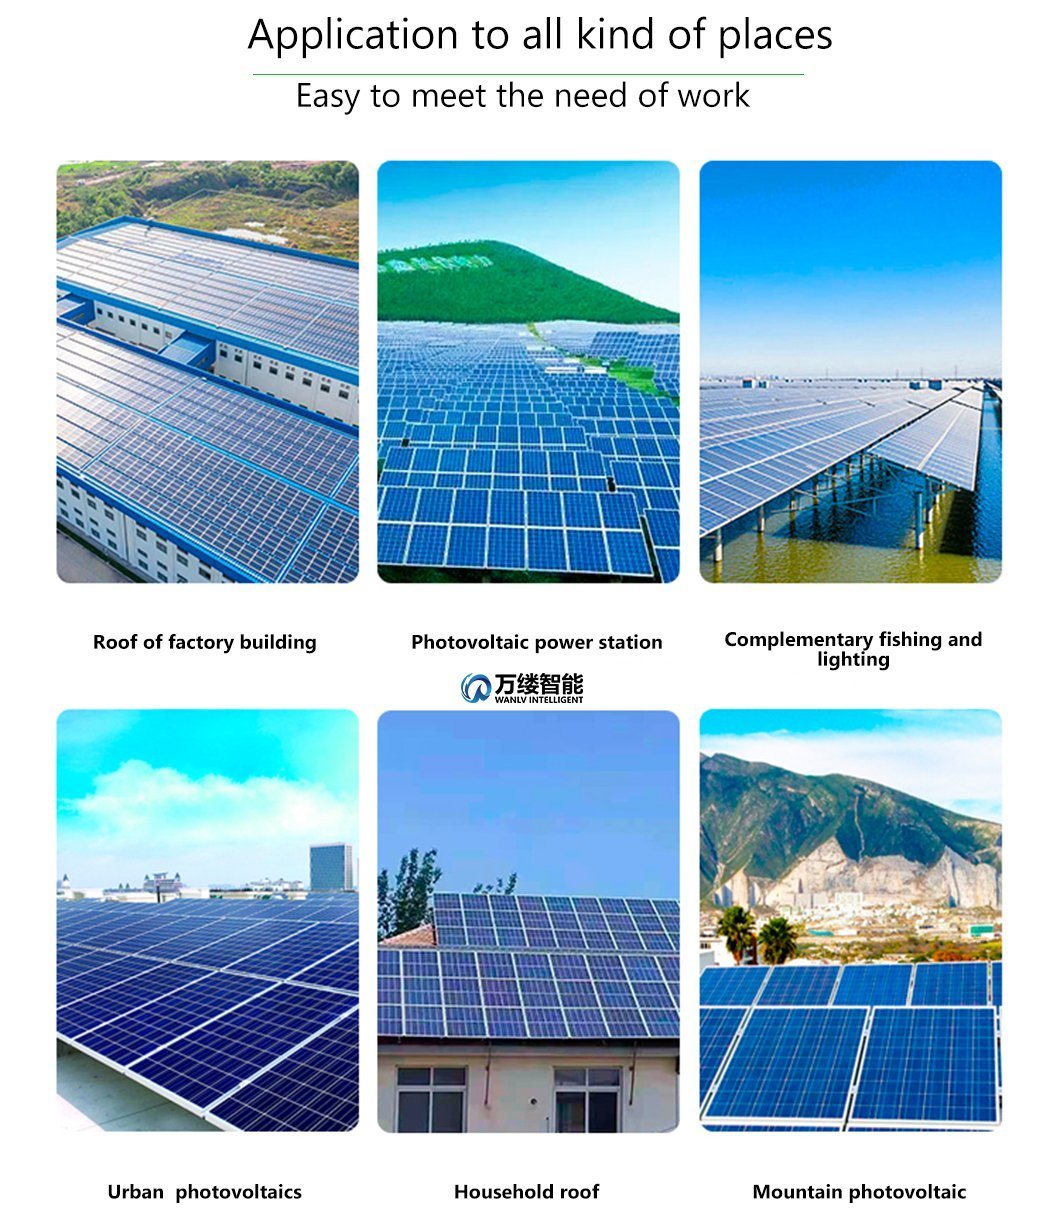 Customized Low Cost PV Cleaning Robot Mobile Solar Panel Cleaning Robot Cleaning Machine with Remote Control